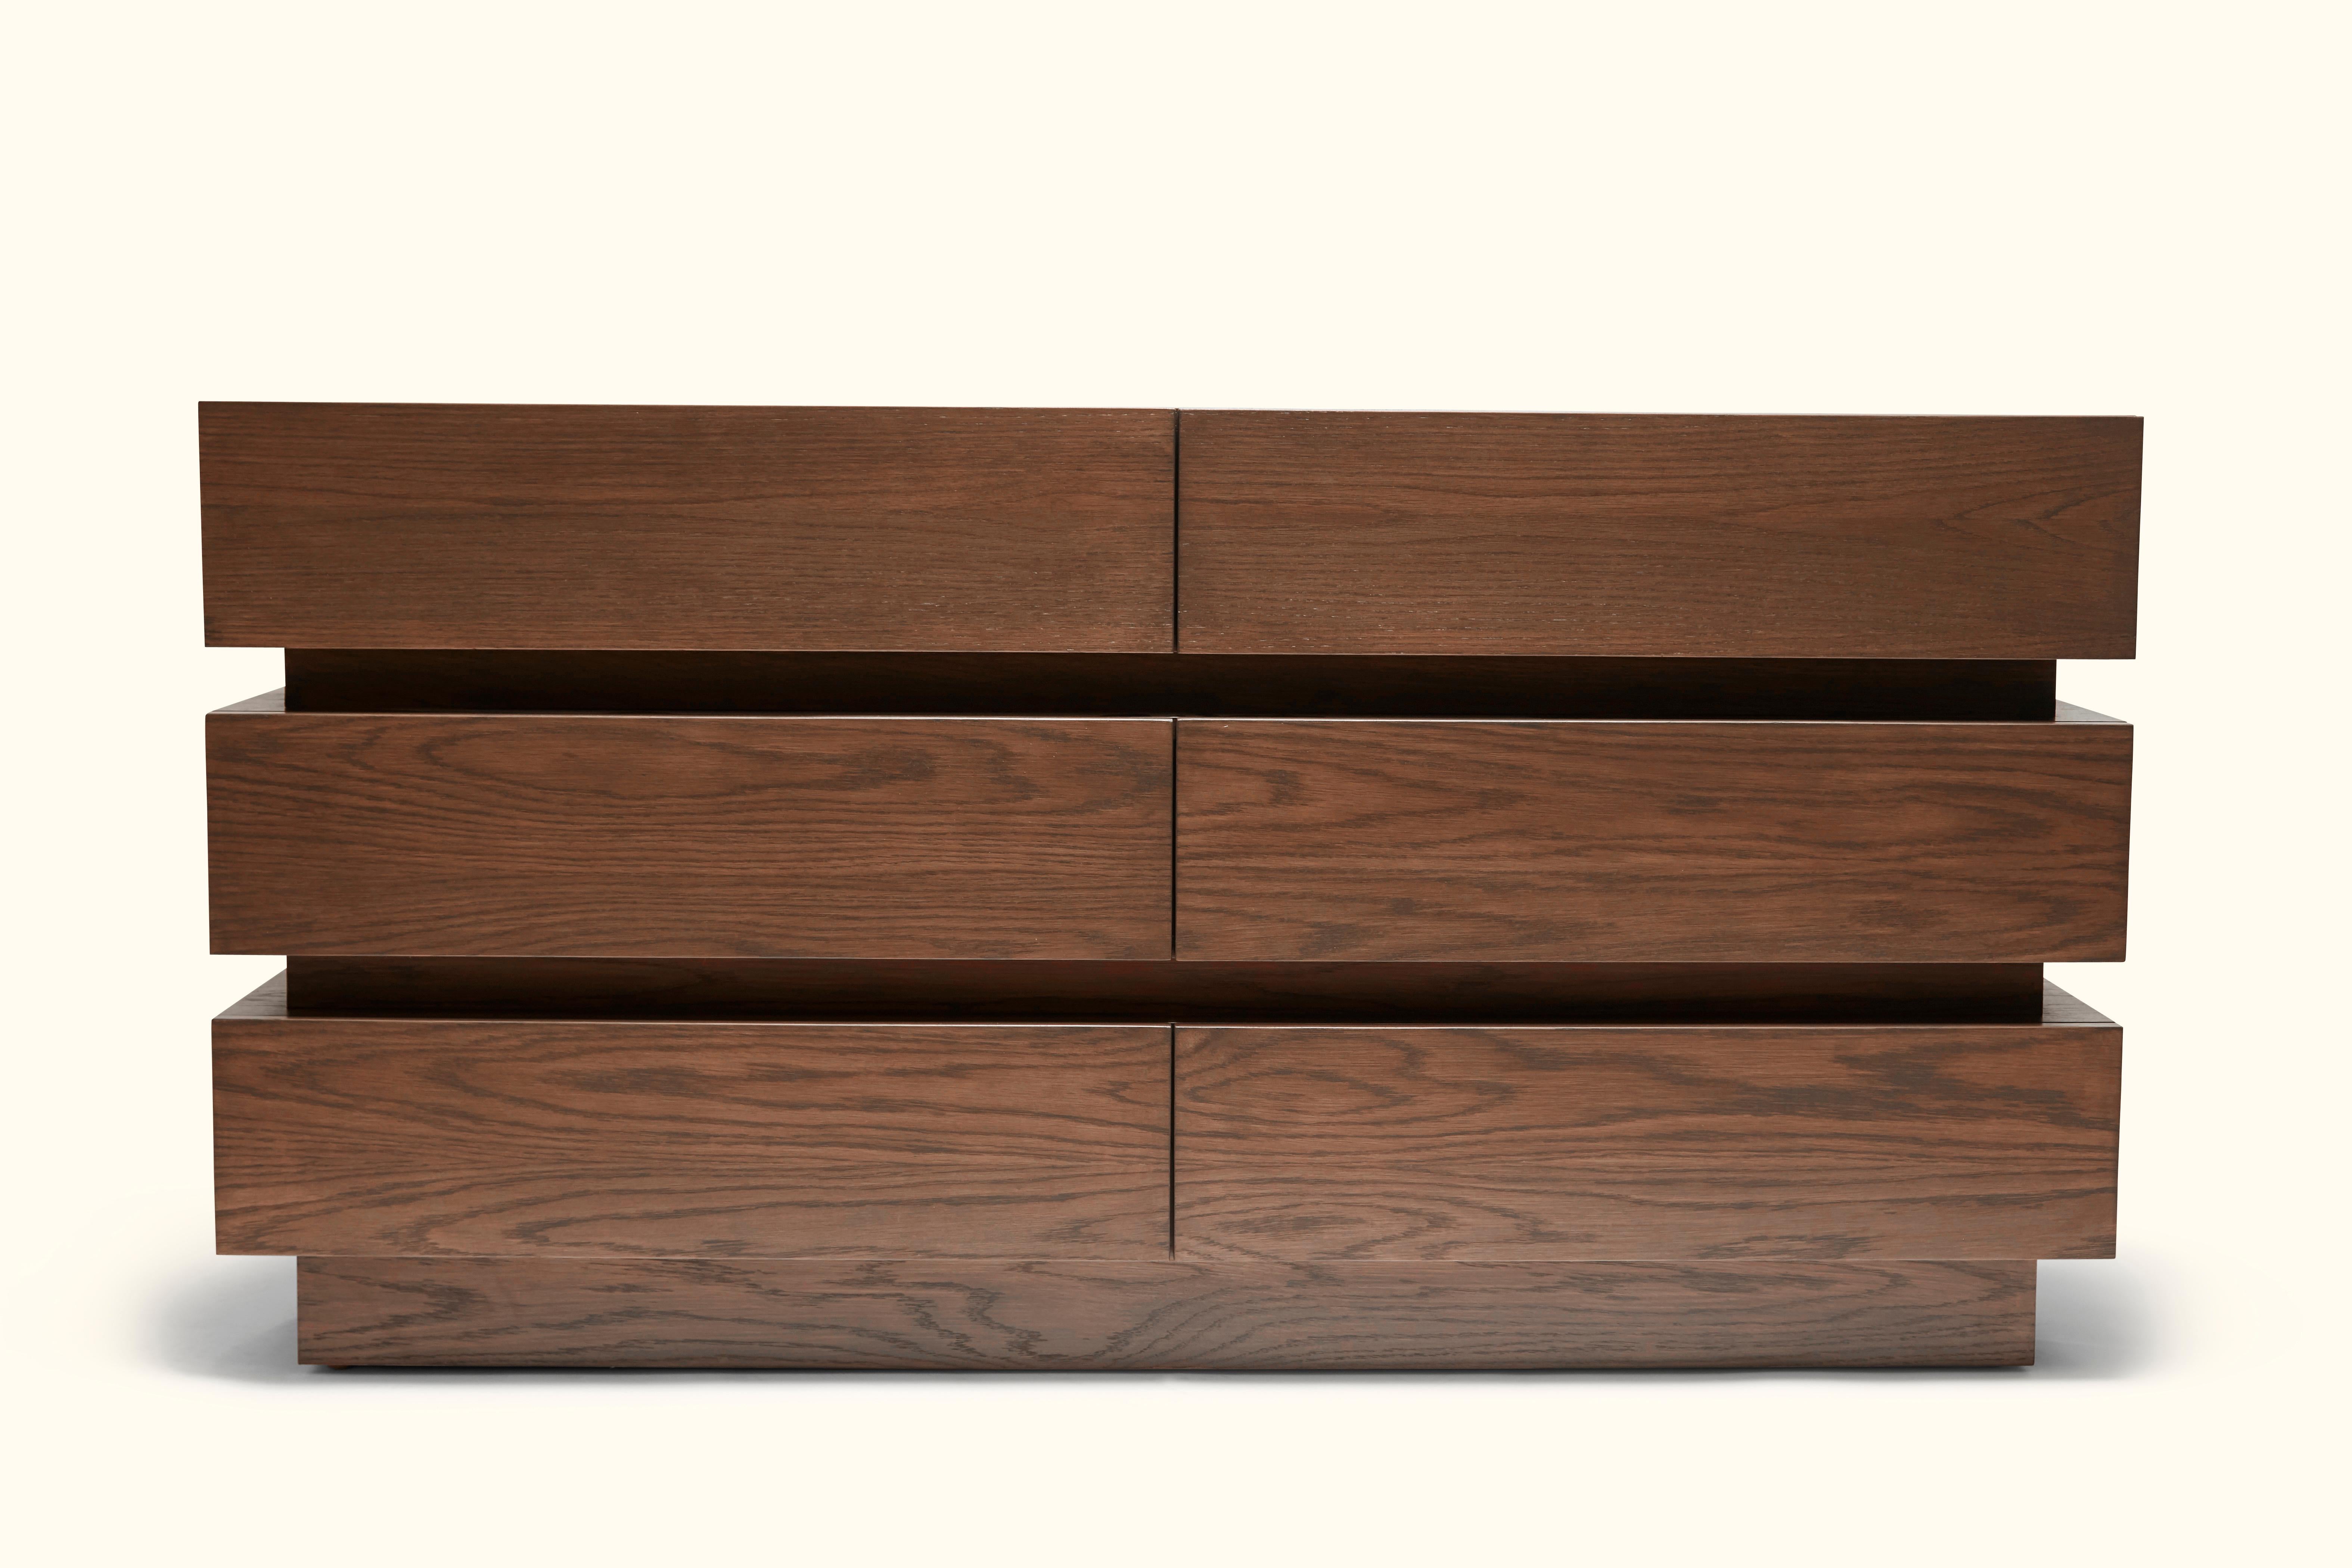 The stacked box dresser features six drawers and is made in American walnut or white oak.